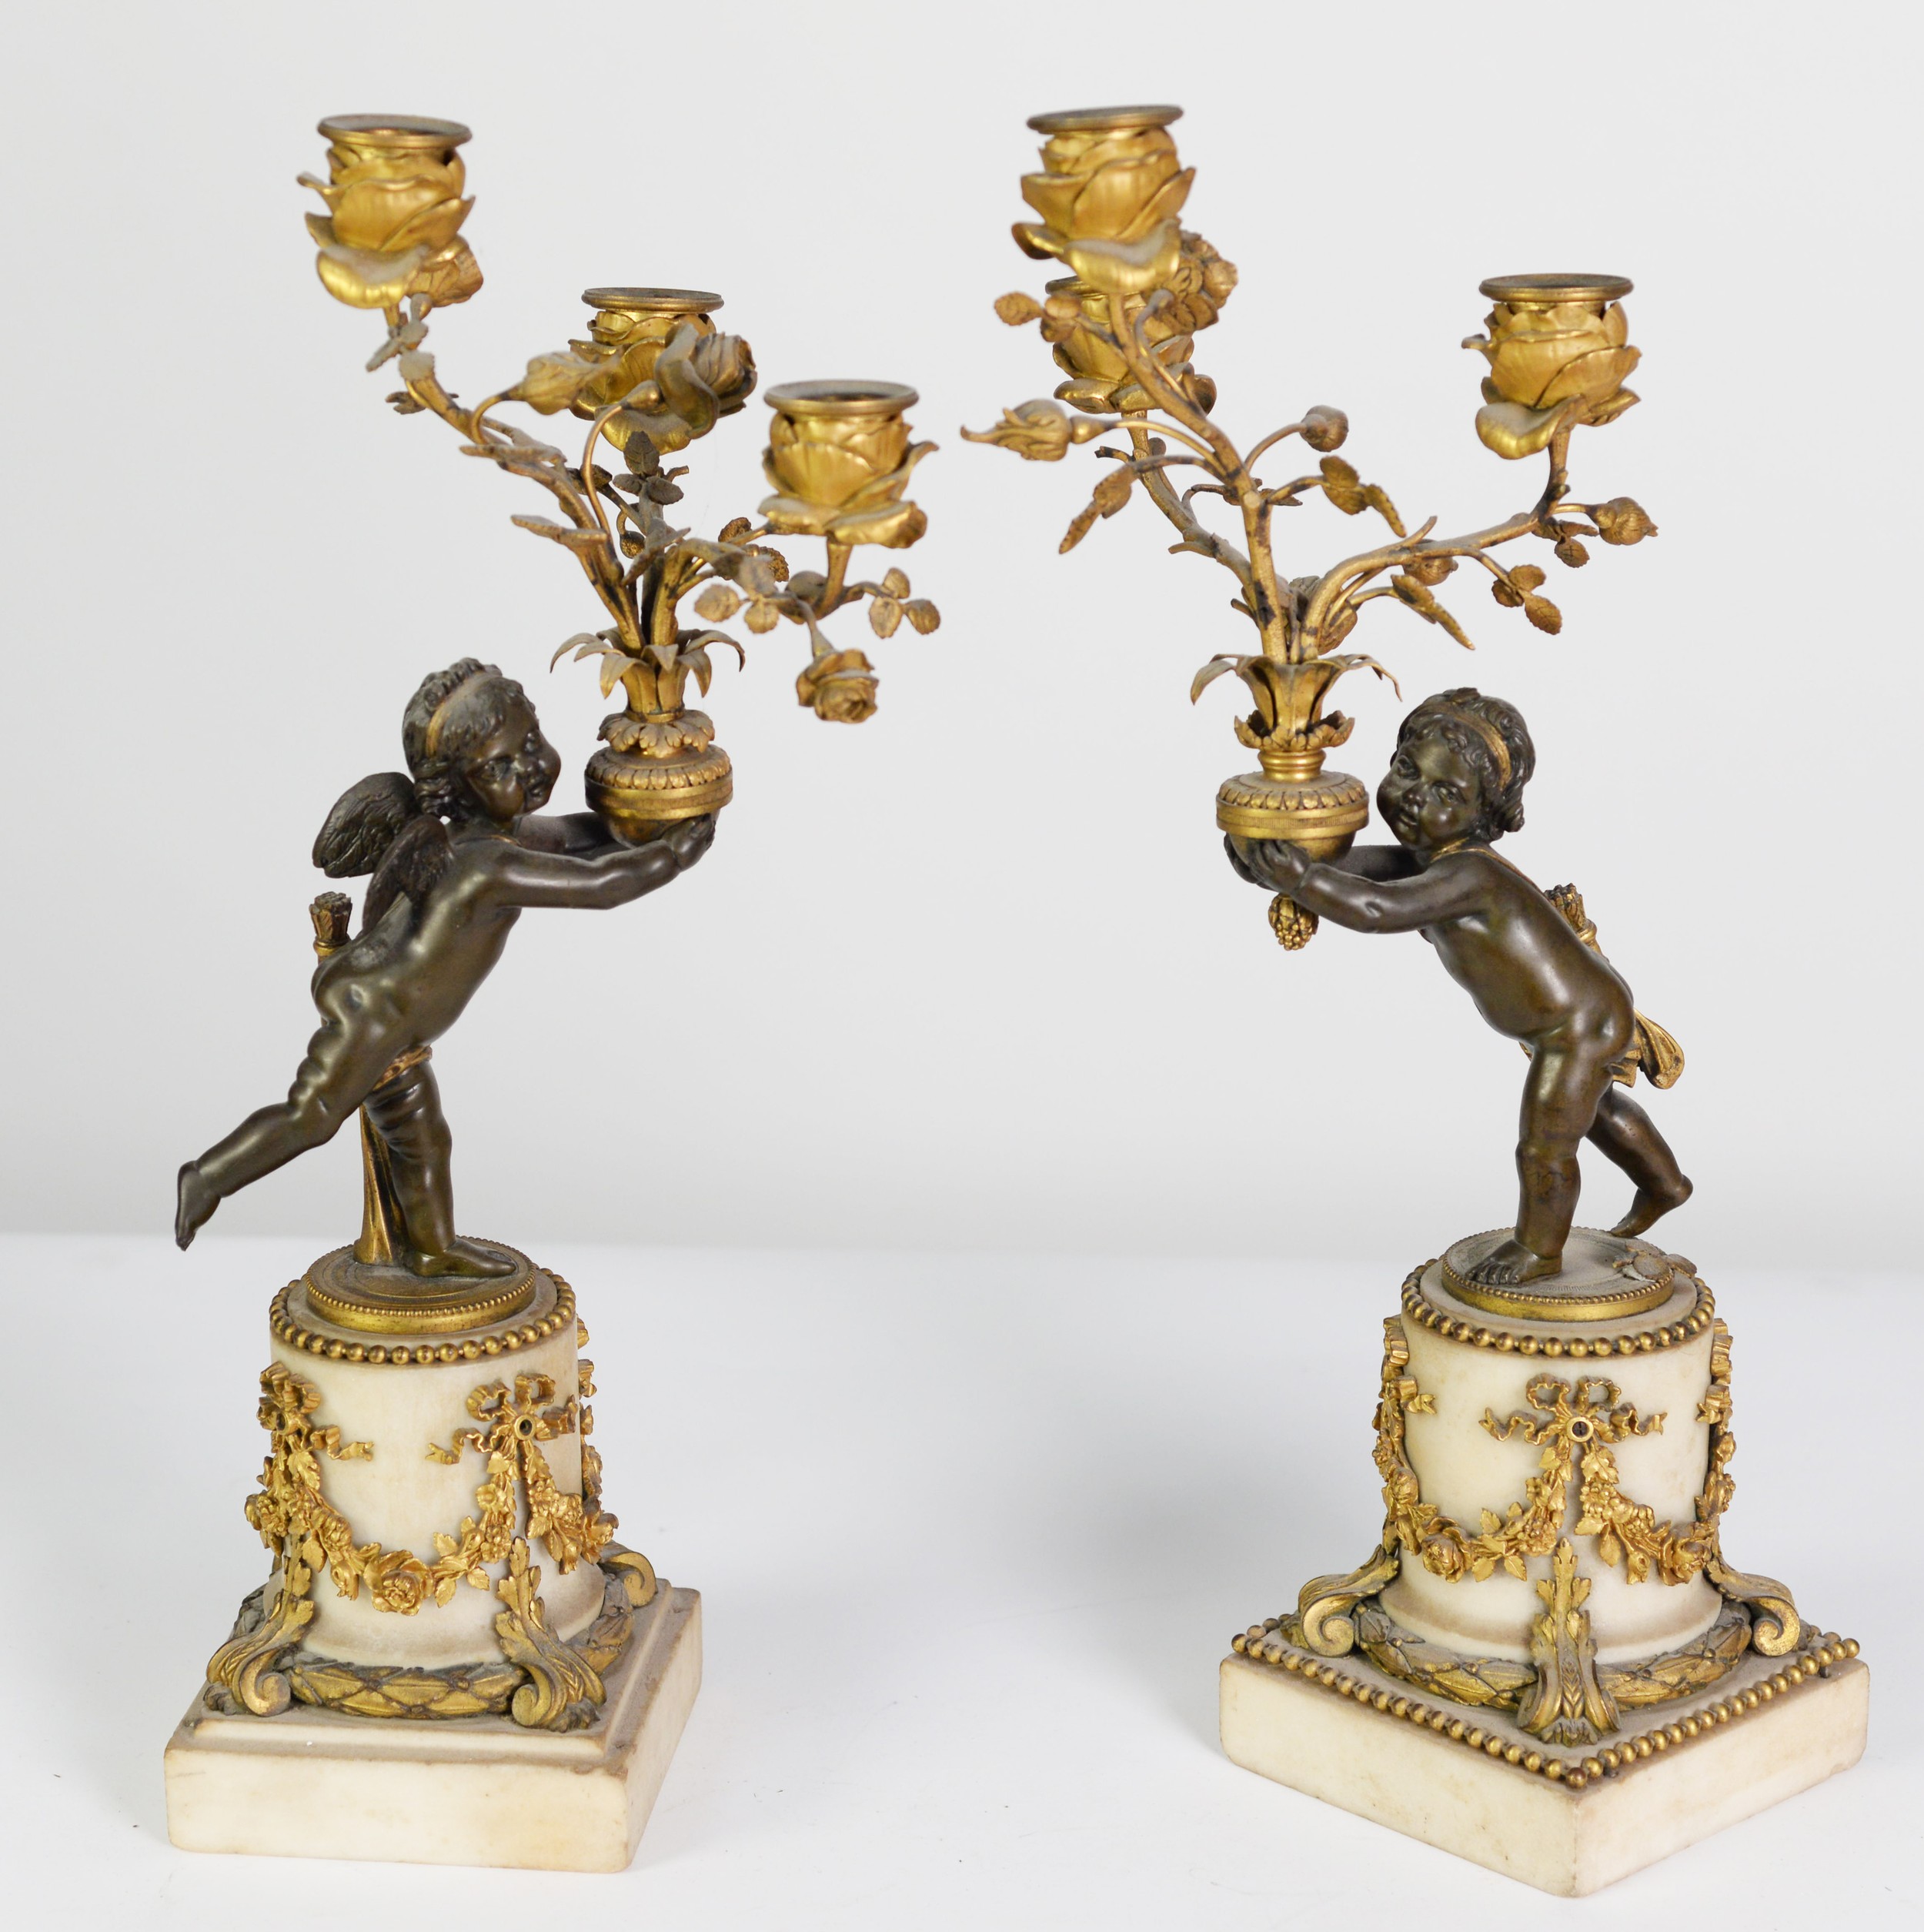 A PAIR OF LATE 18TH CENTURY NEO-CLASSICAL PARCEL GILT BRONZE CANDELABRUM, modelled as winged putti